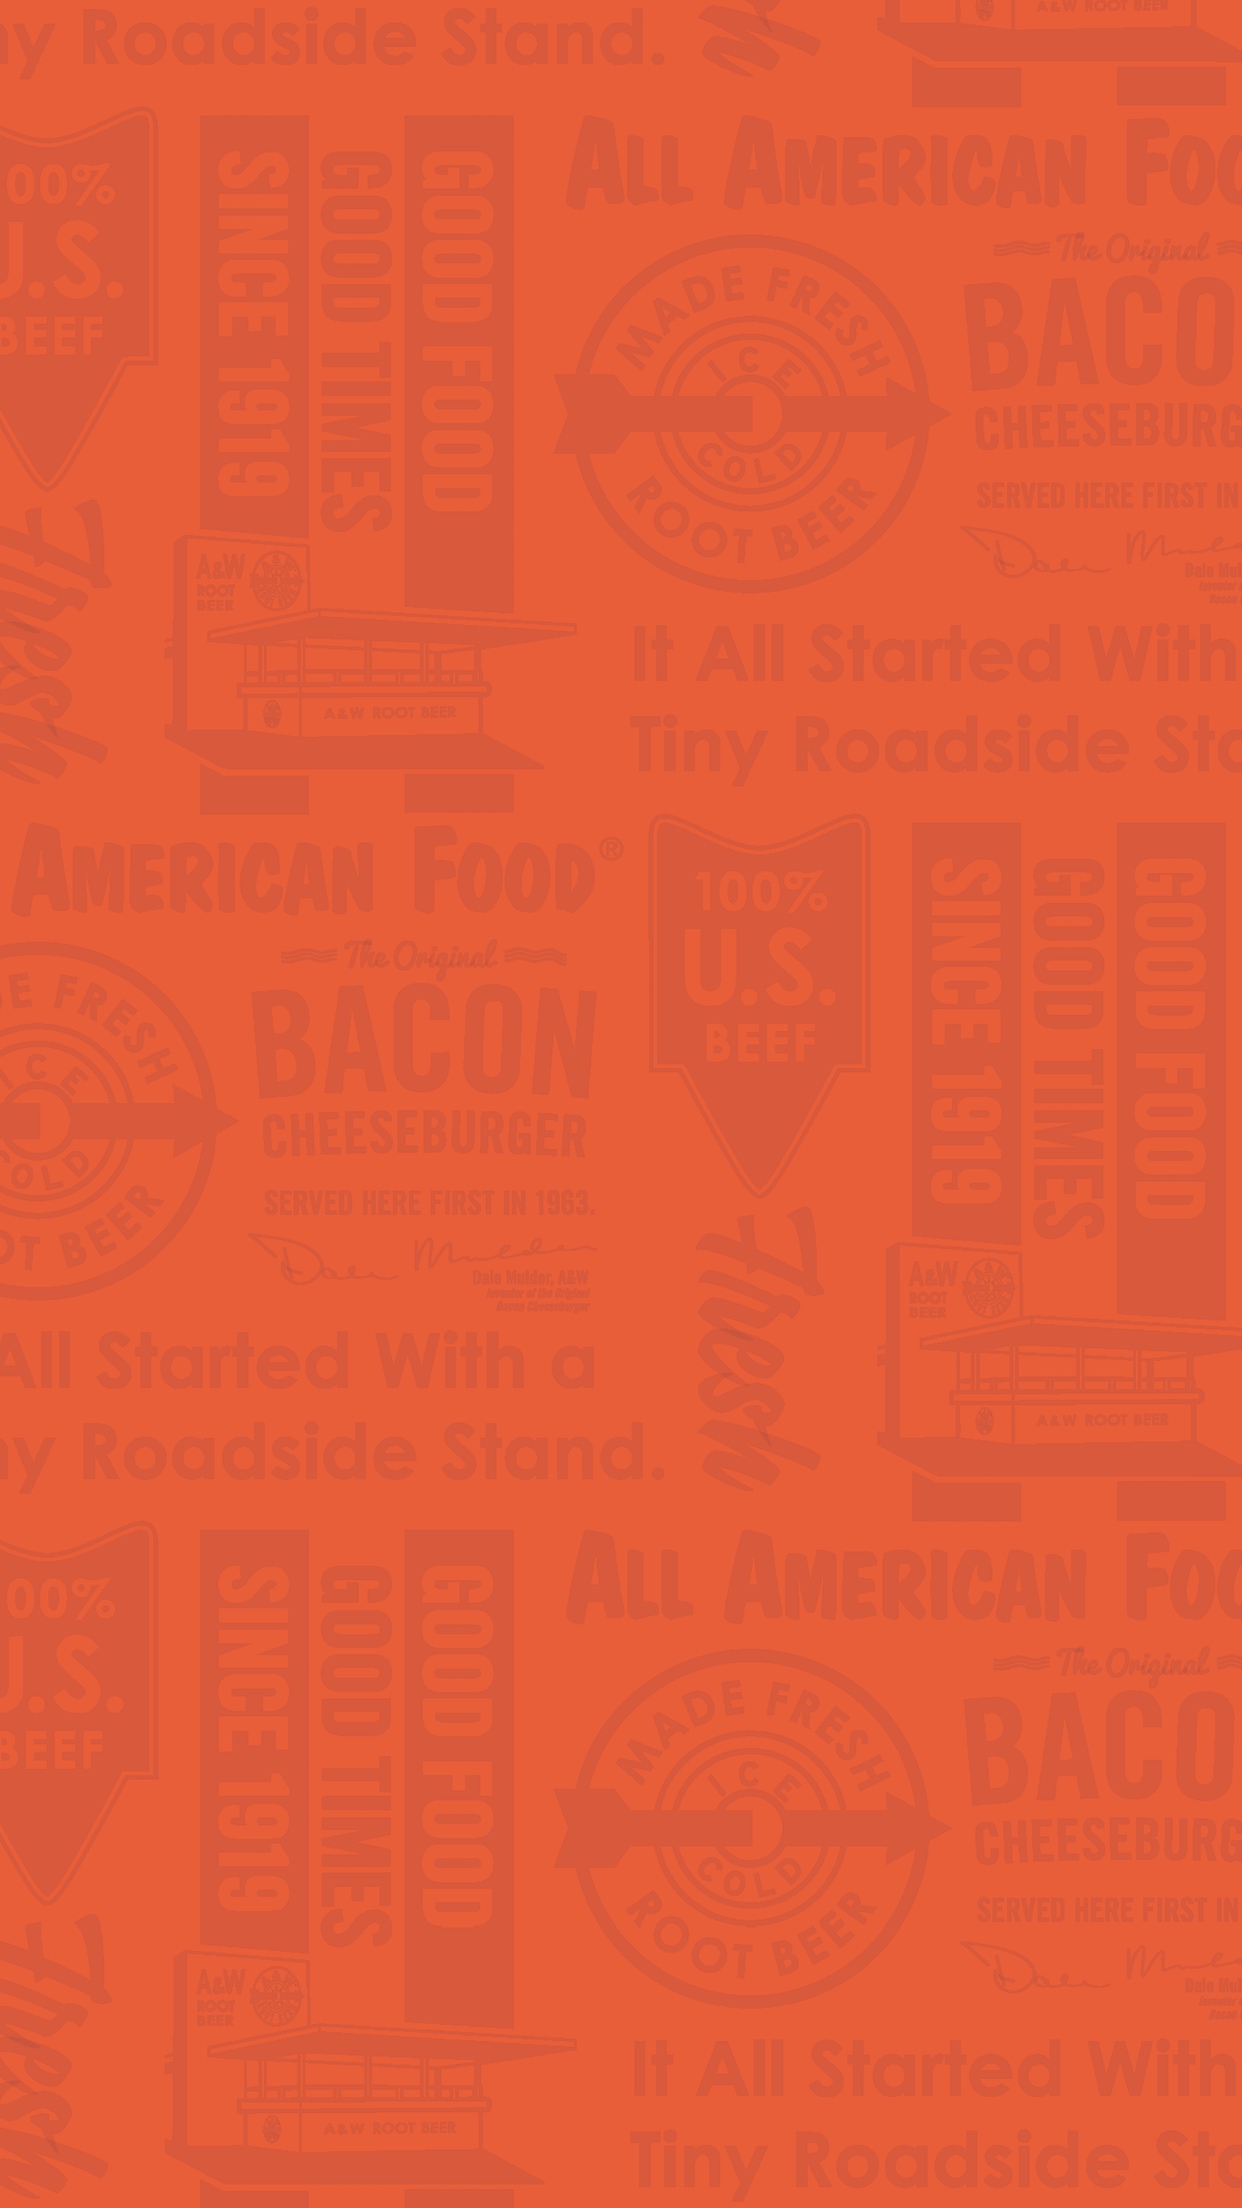 Orange phone wallpaper with A&W Restaurants logo, 'It all started with a roadside stand' text, Original Bacon Cheeseburger text